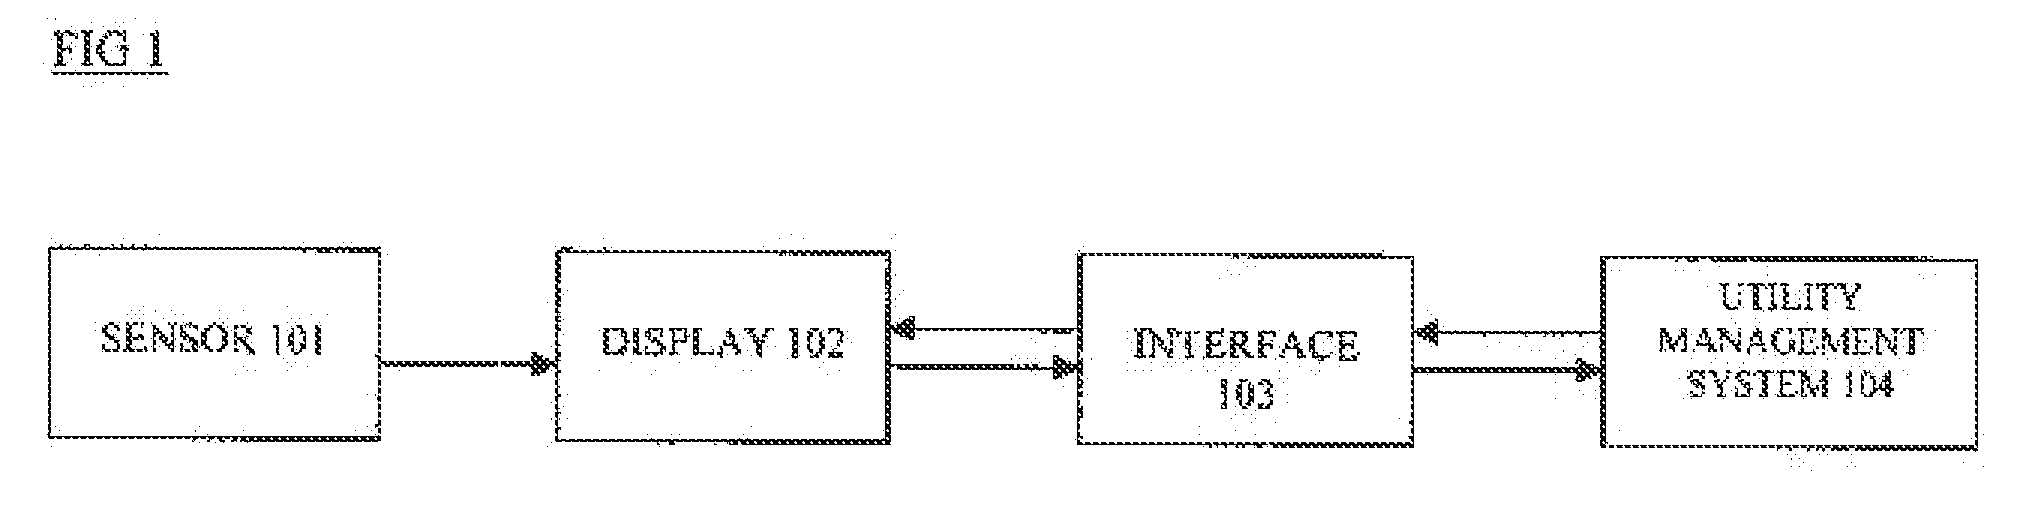 Utility data processing system